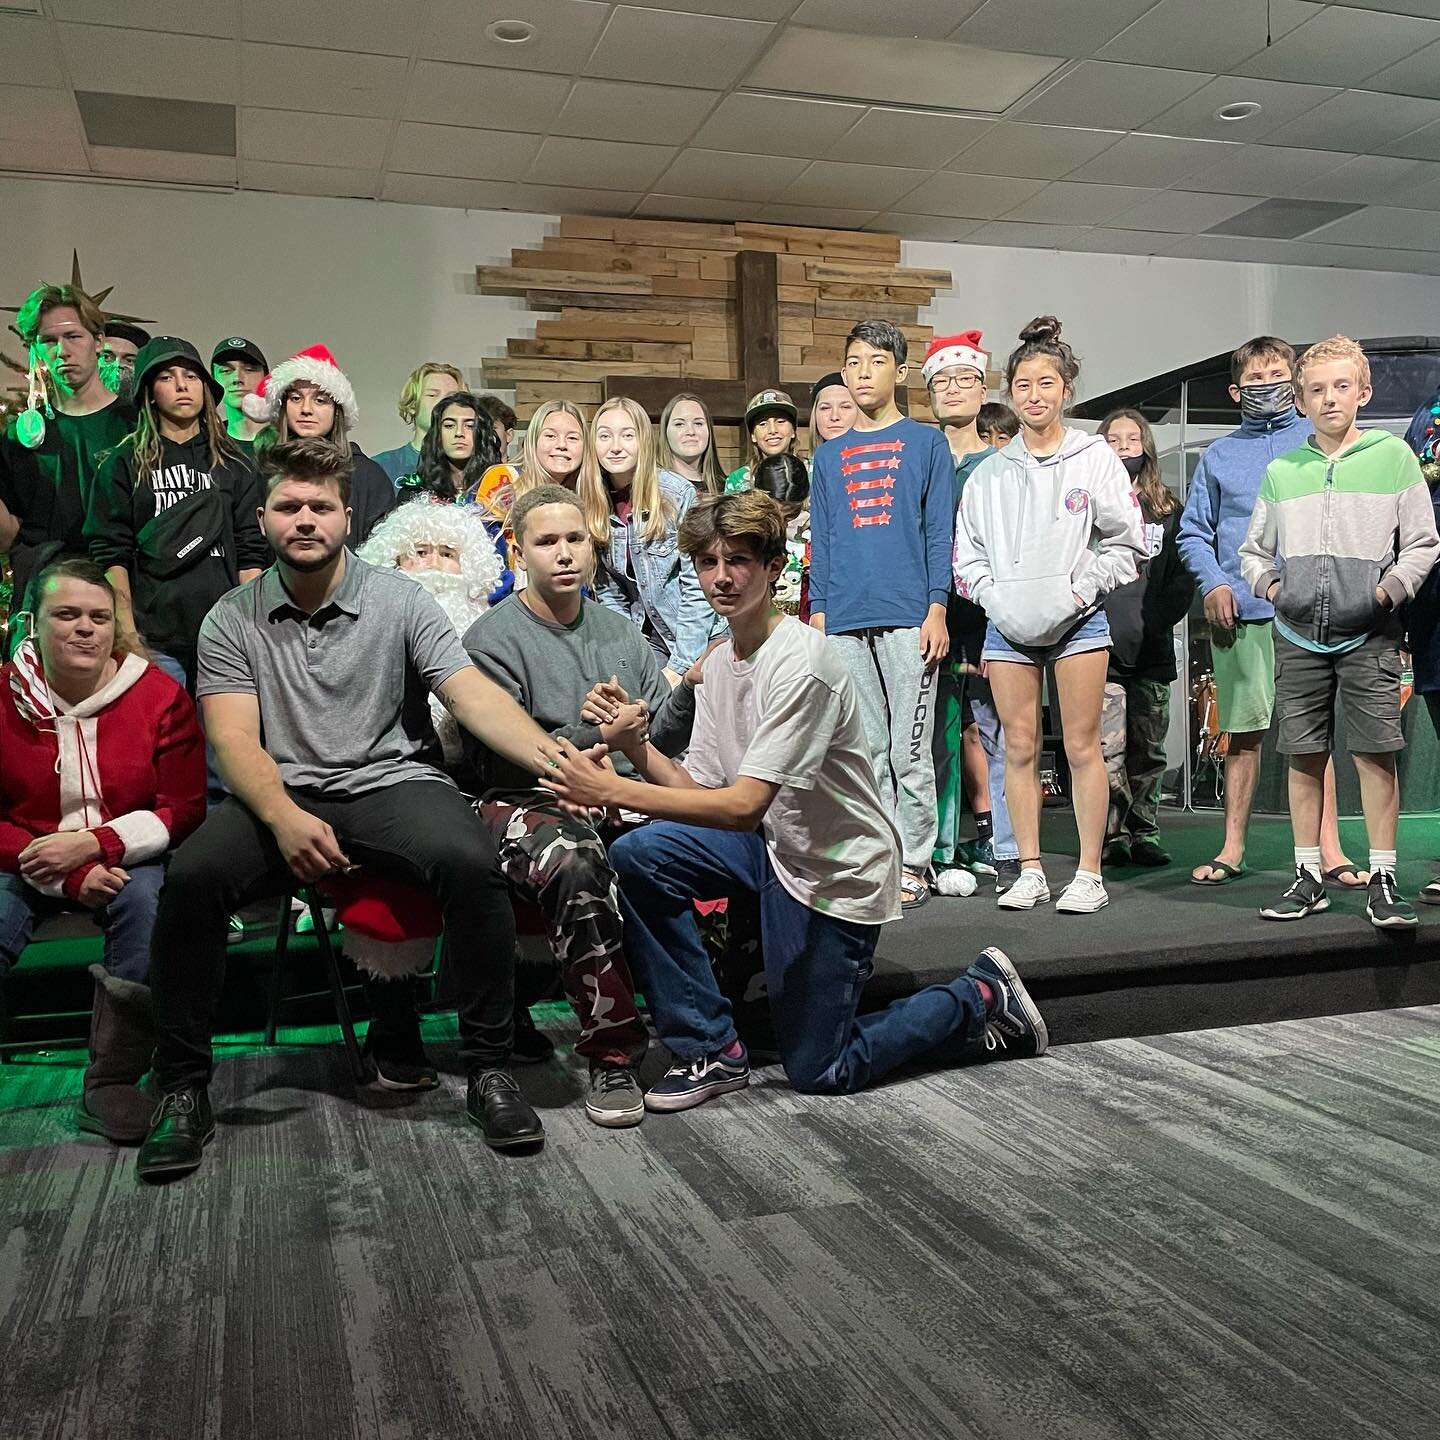 As we head into 2021 and pray for a better year, it&rsquo;s important to look back at 2020 and see some of the good that we were able to experience. 

One great example was our Christmas Party! What a blessing to share some holiday spirit with these 